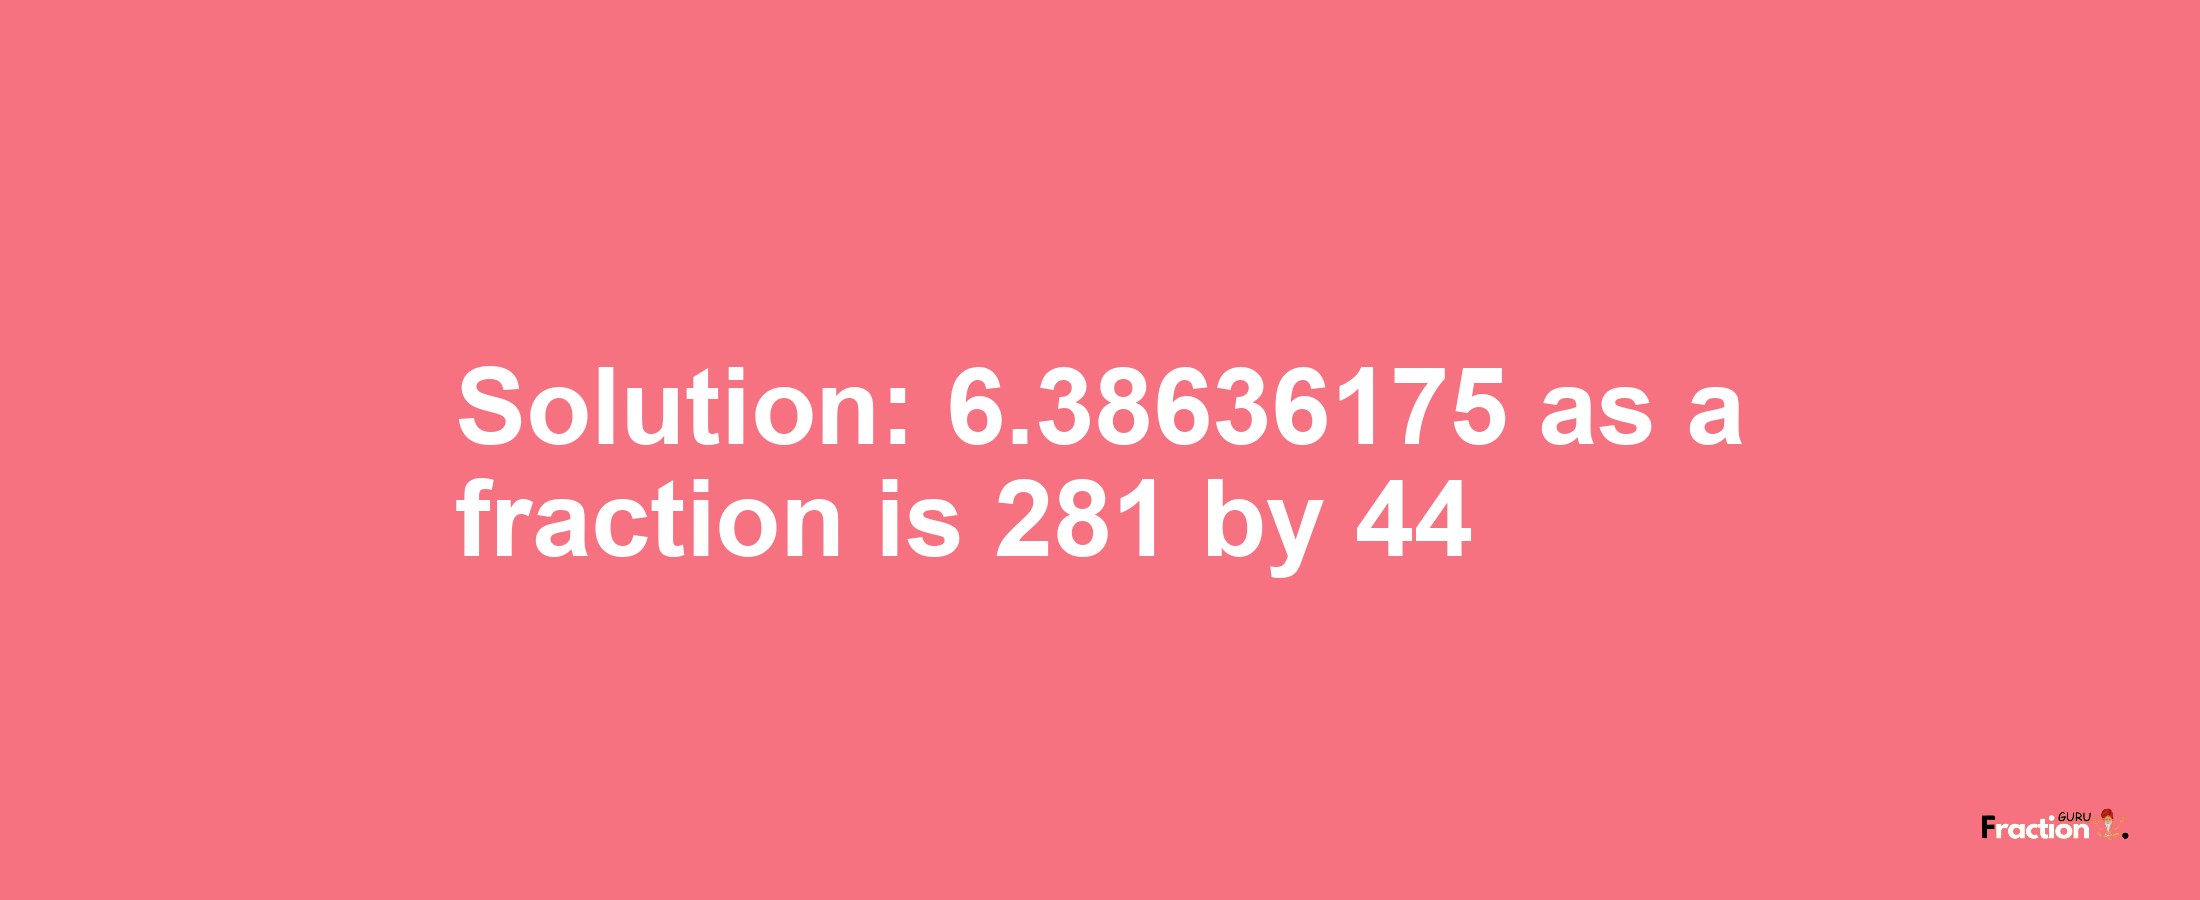 Solution:6.38636175 as a fraction is 281/44